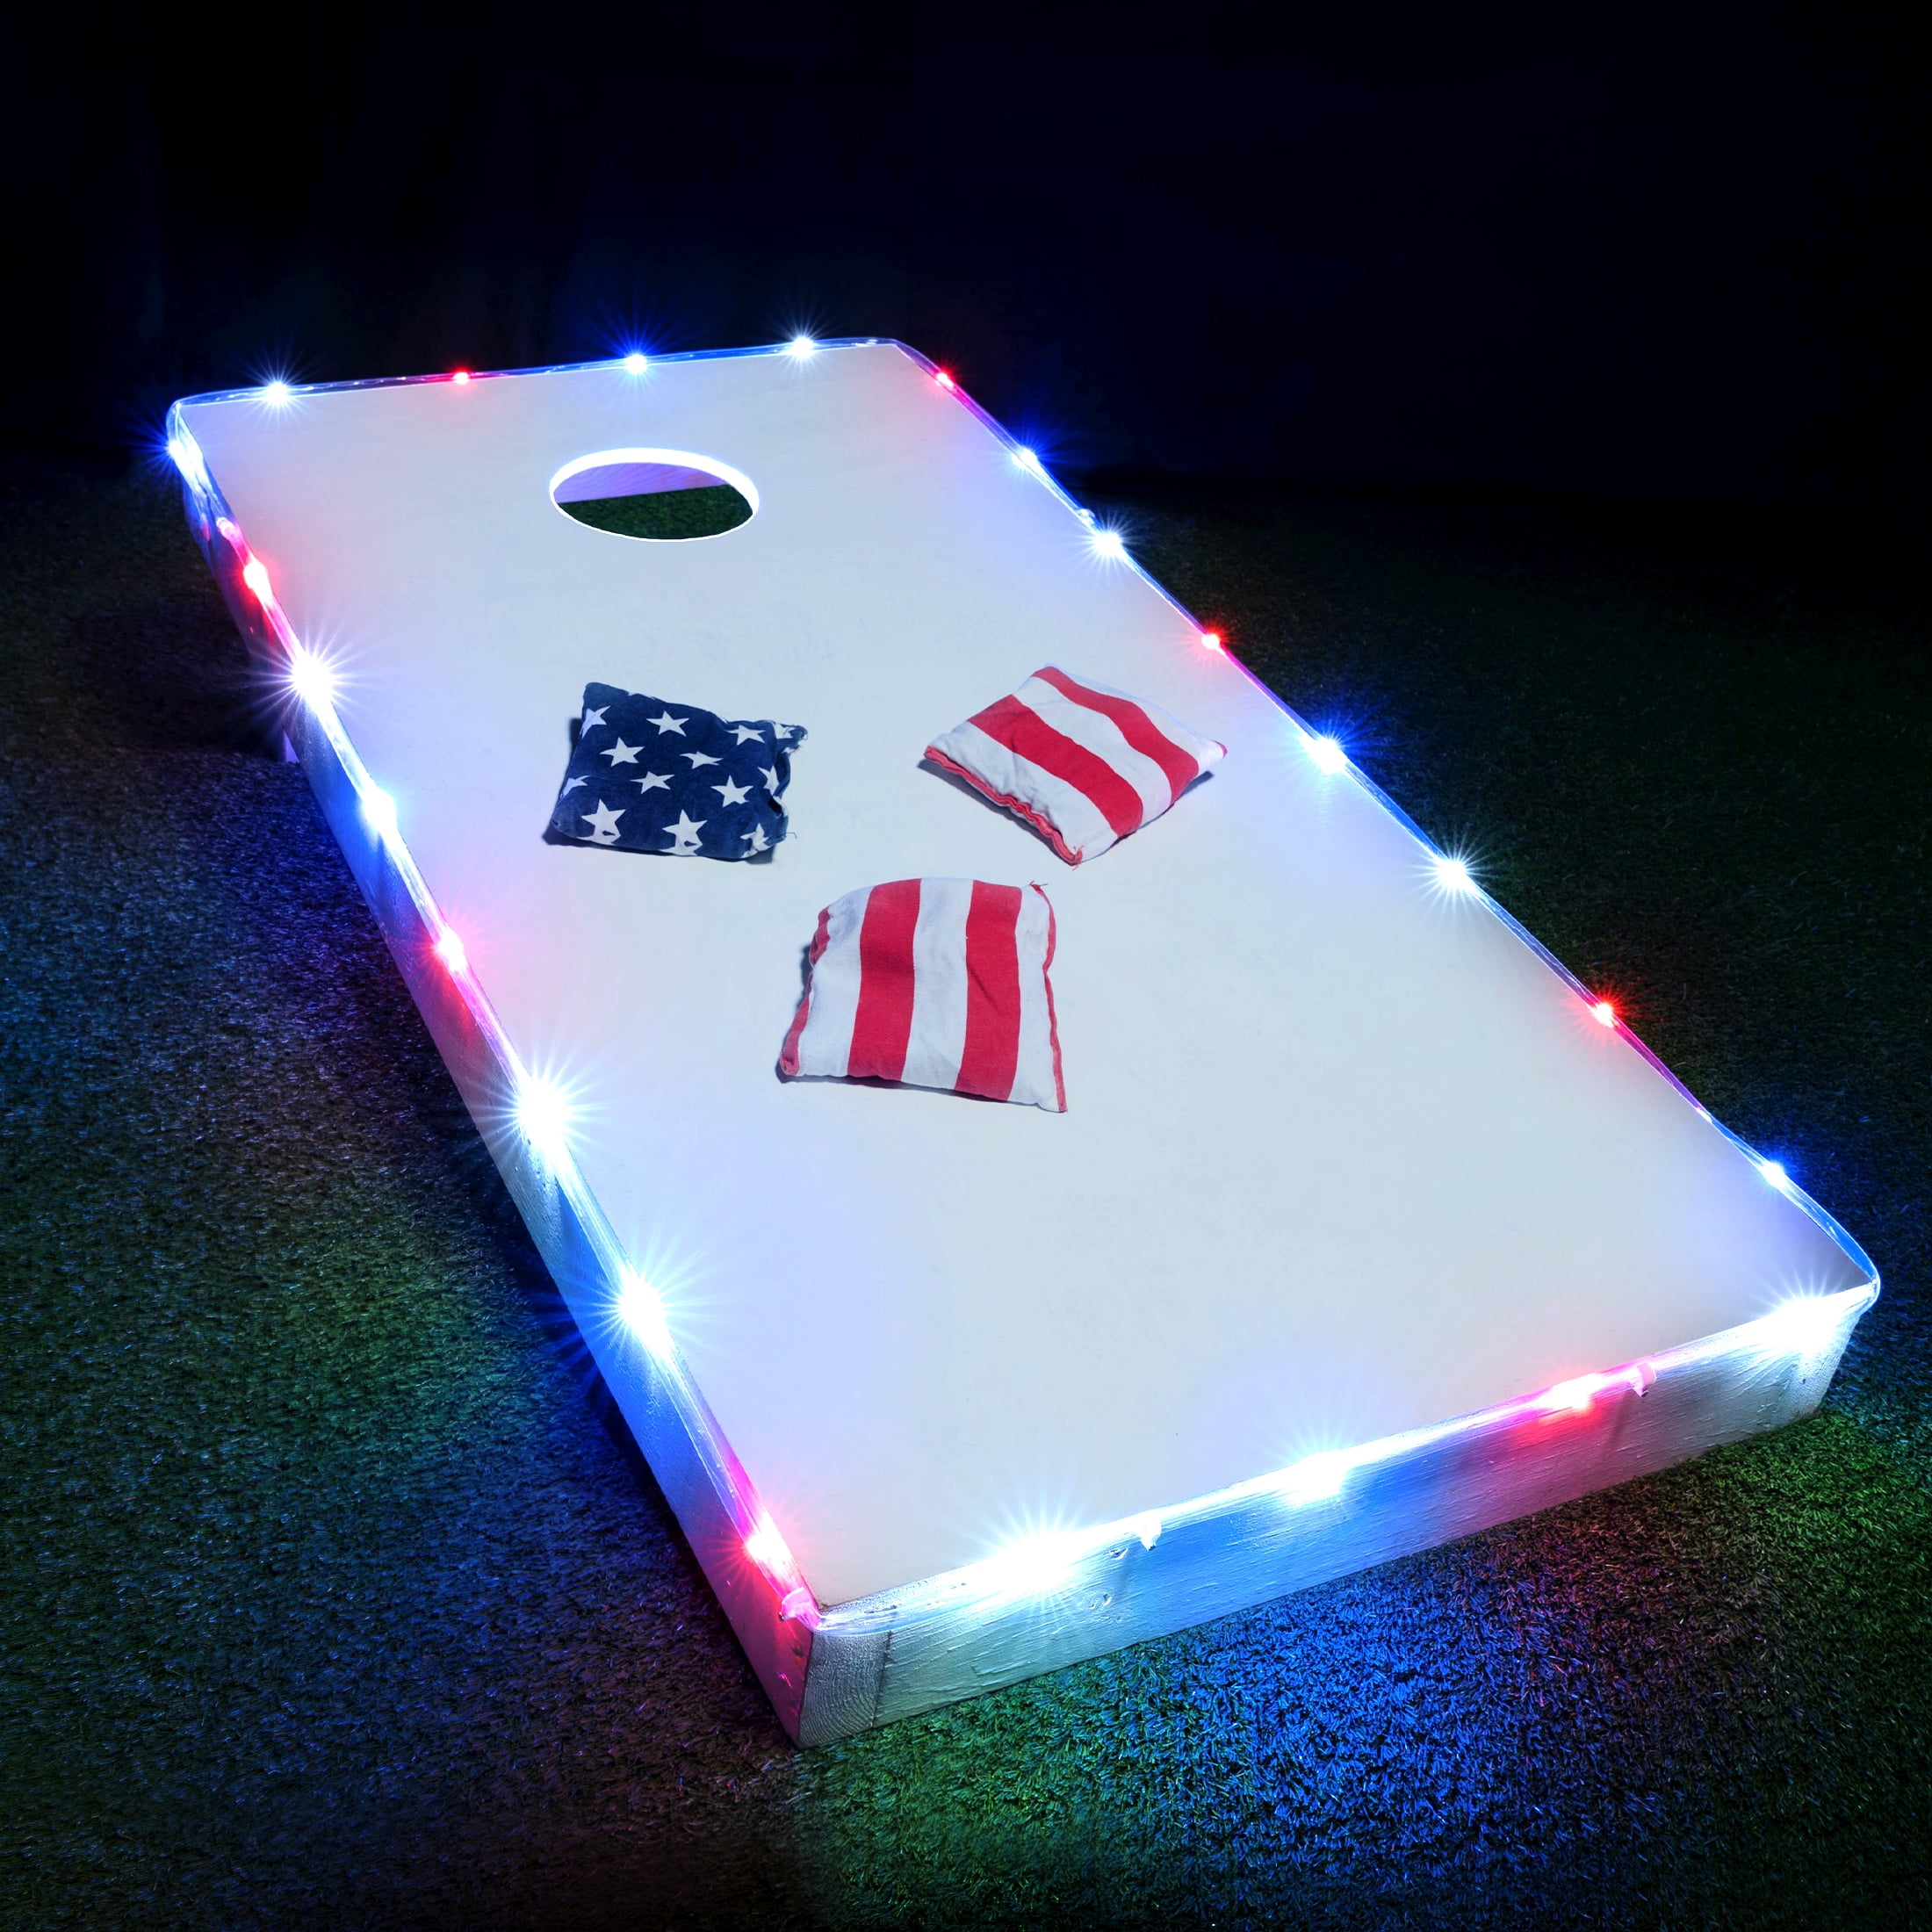 FREE Shipping College Parties BBQ's Birthdays SALE Great for Tailgating Country Living Themed Black Nail Cornhole Boards